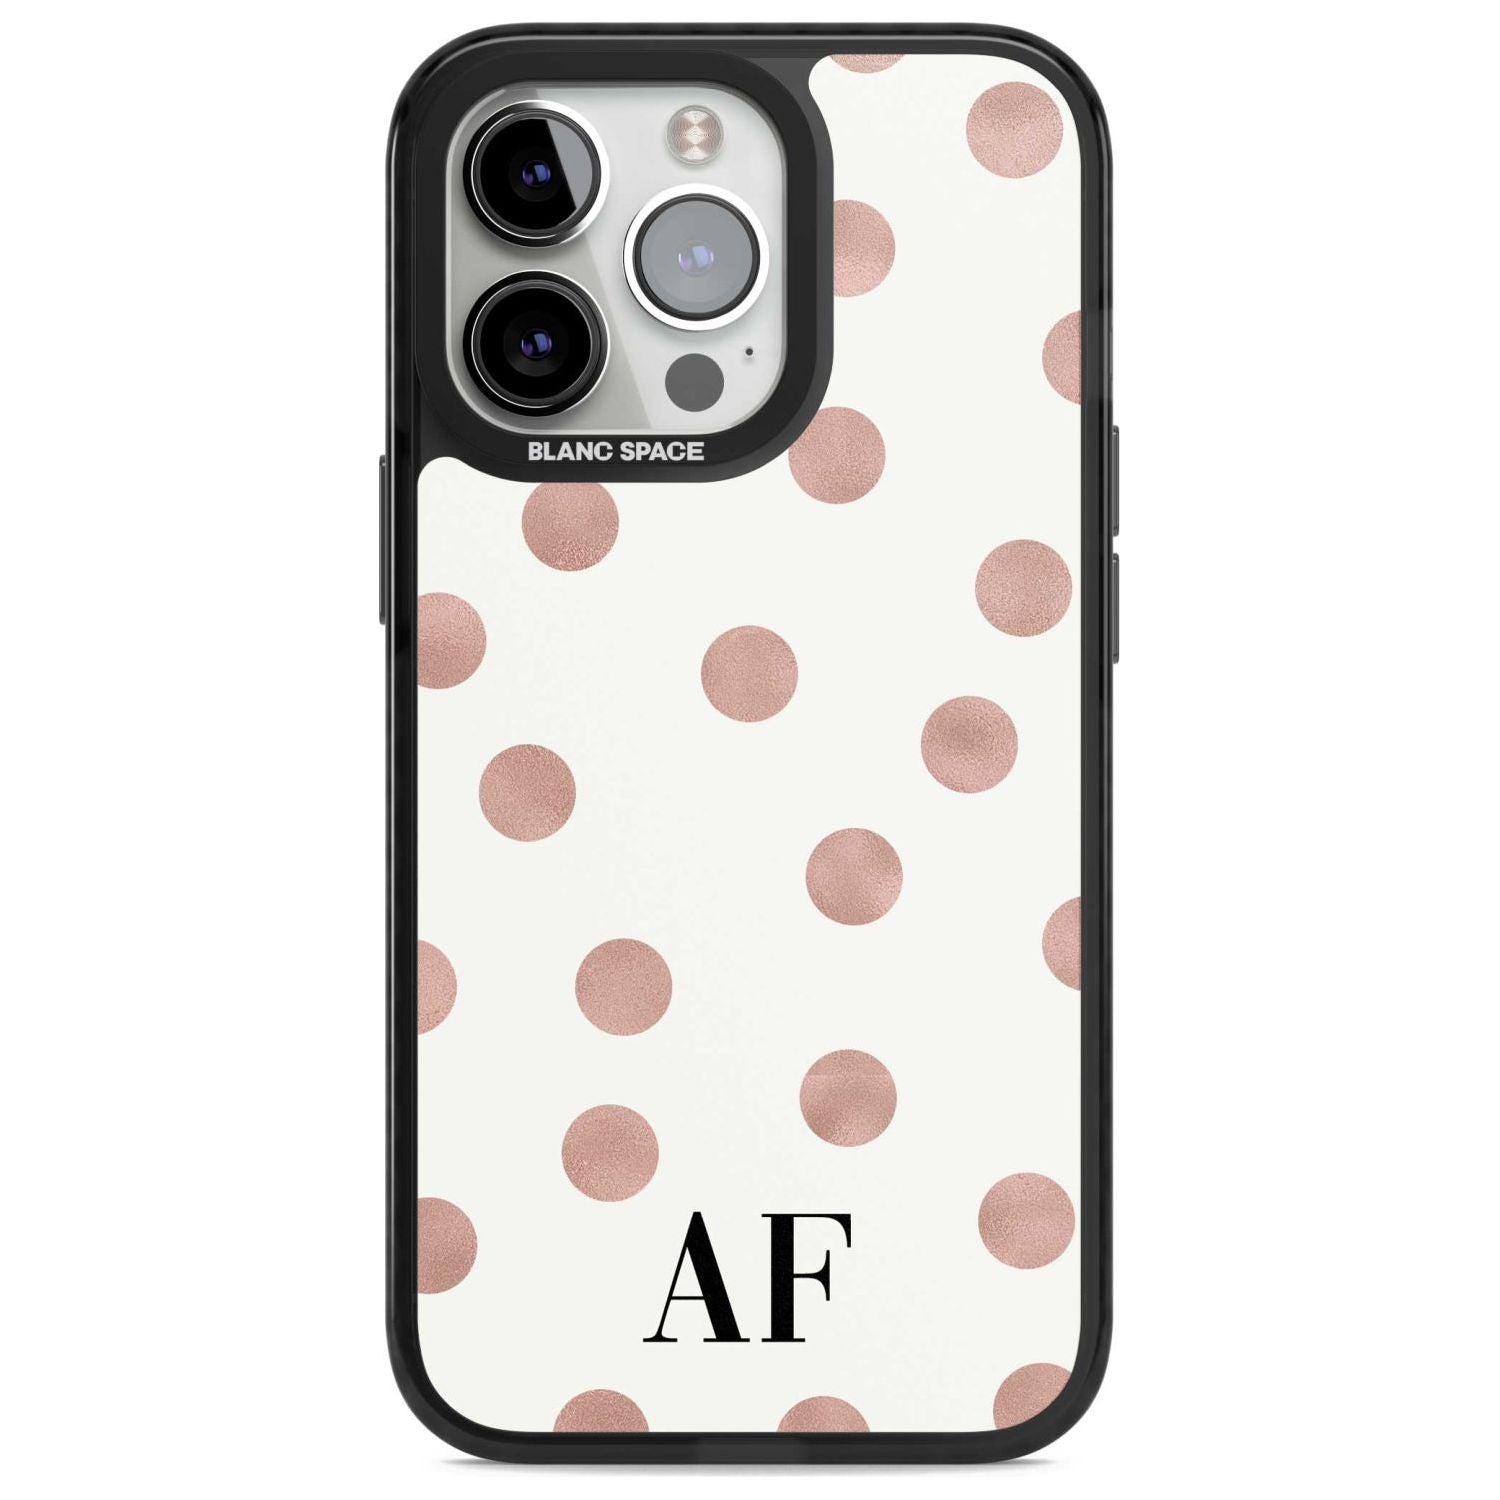 Personalised Initials & Dots Custom Phone Case iPhone 15 Pro Max / Magsafe Black Impact Case,iPhone 15 Pro / Magsafe Black Impact Case,iPhone 14 Pro Max / Magsafe Black Impact Case,iPhone 14 Pro / Magsafe Black Impact Case,iPhone 13 Pro / Magsafe Black Impact Case Blanc Space